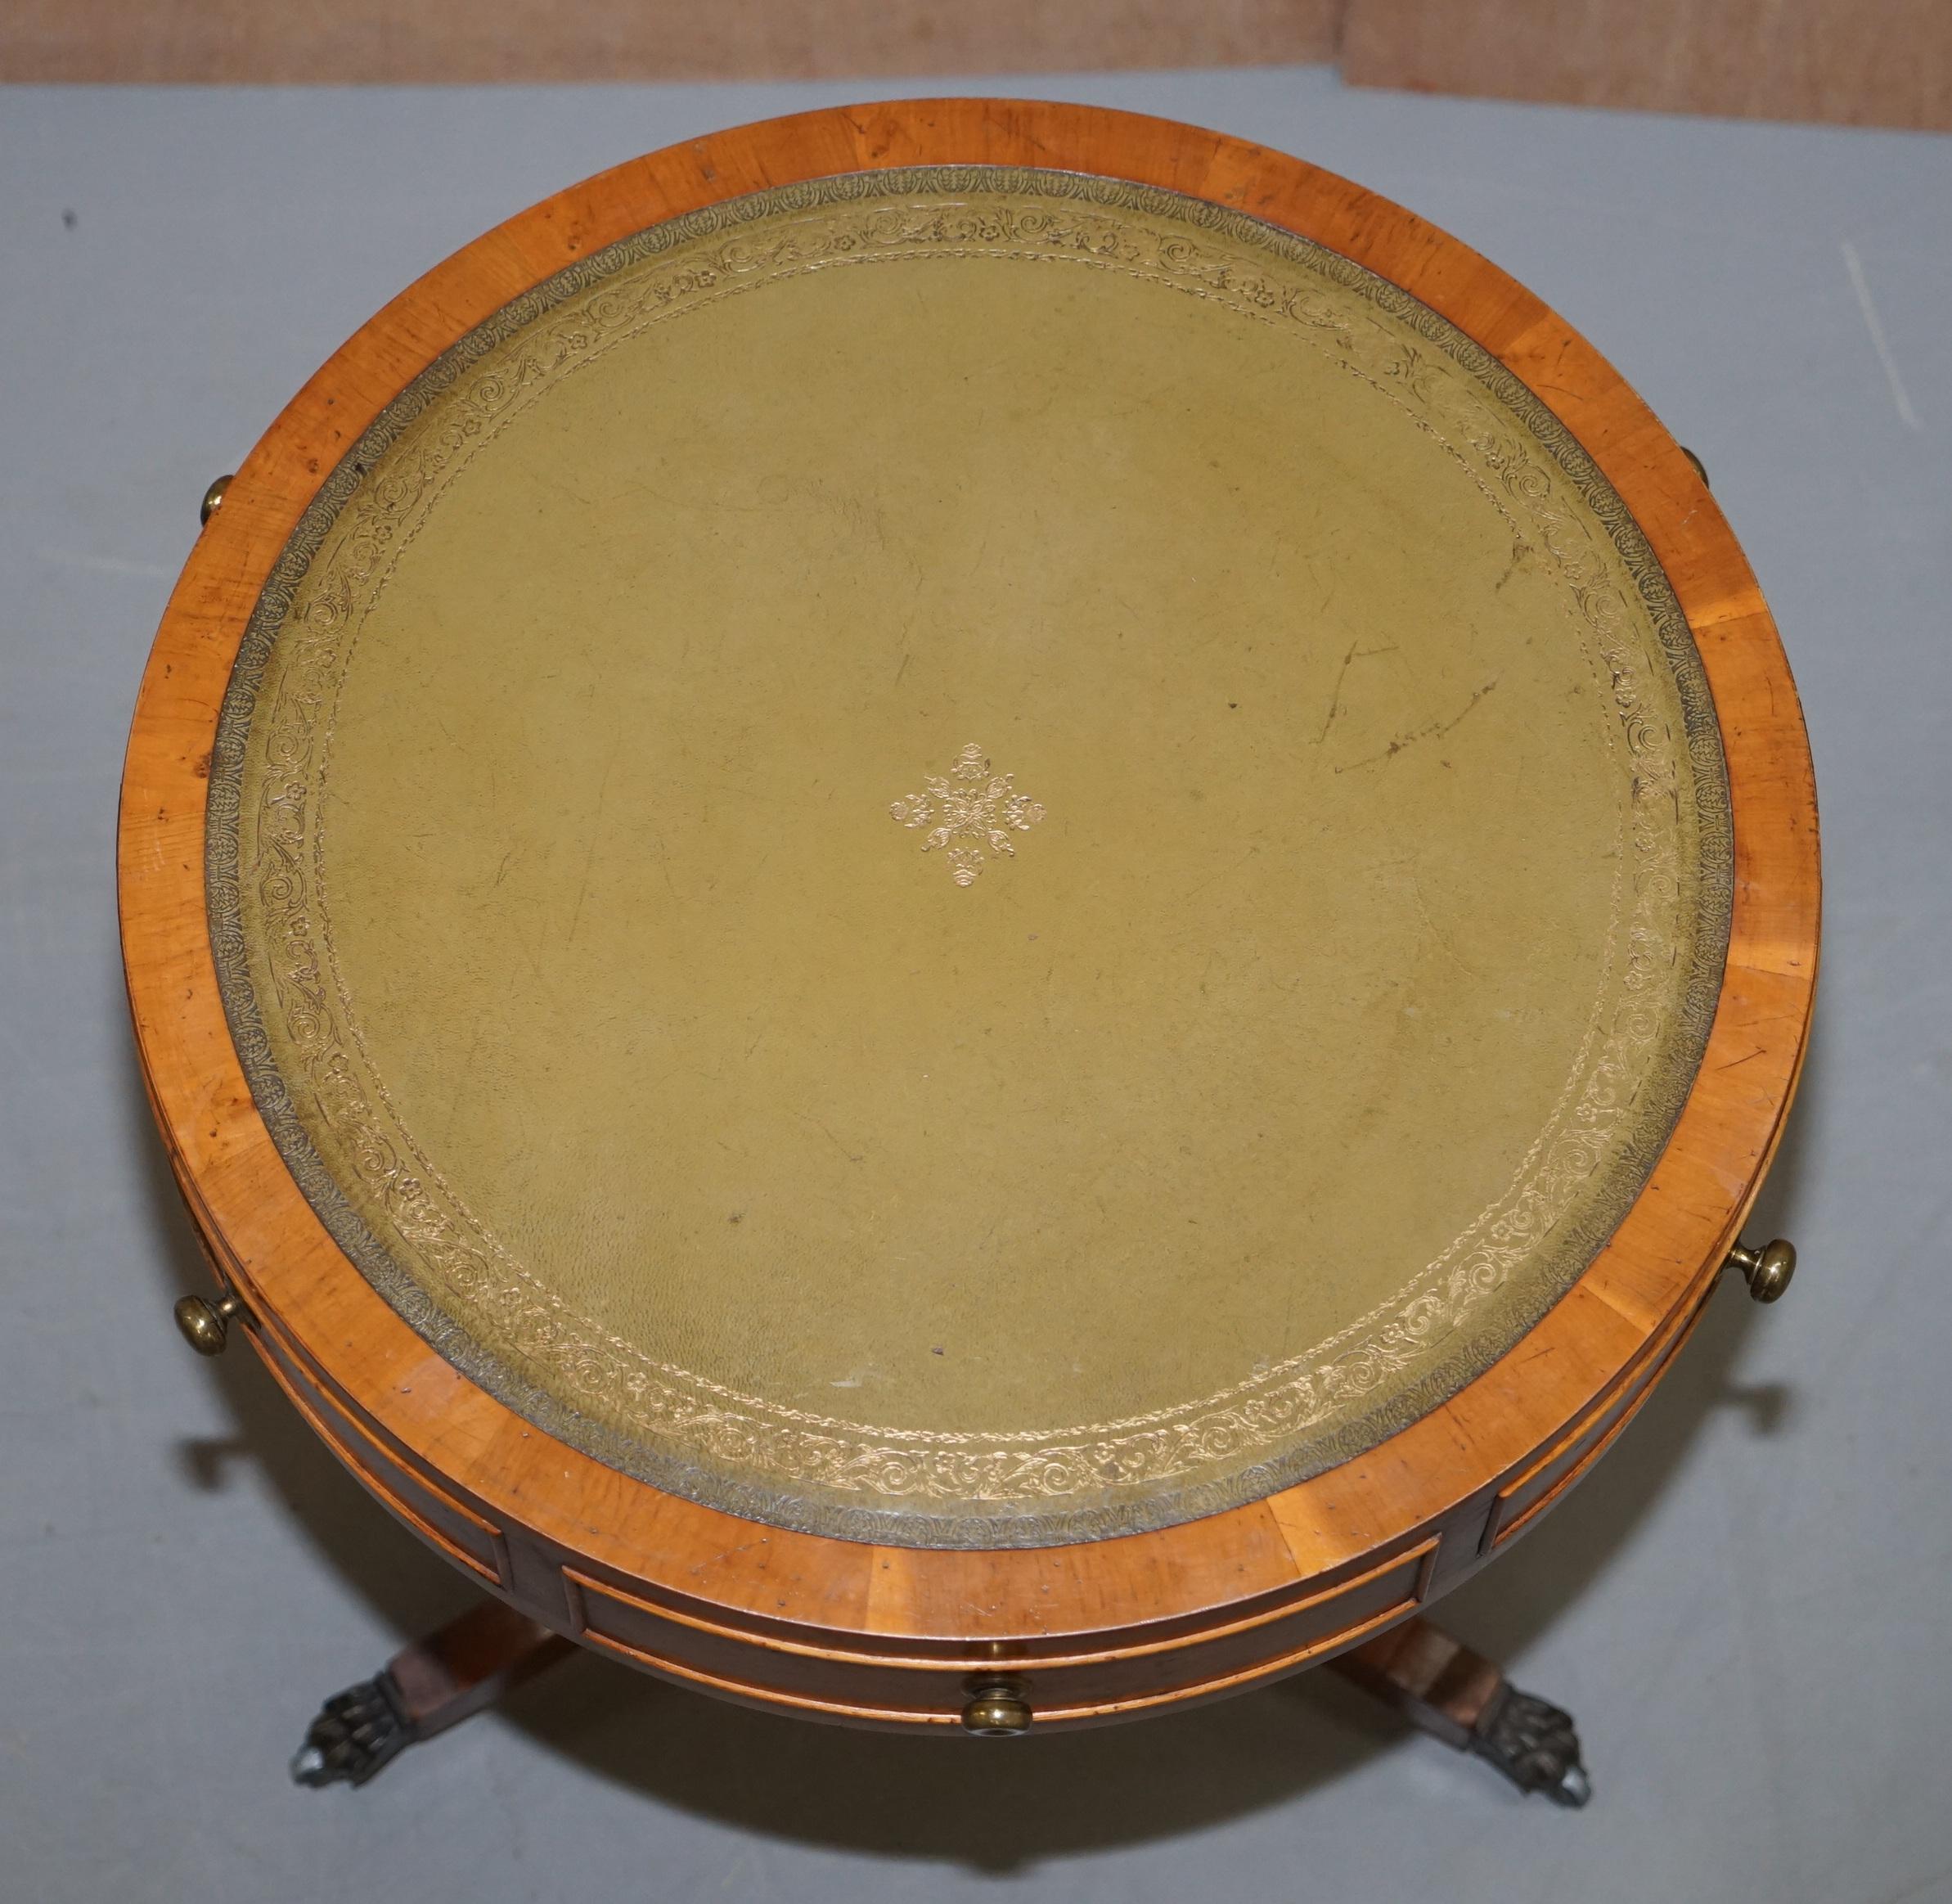 We are delighted to offer for sale this lovely Bevan Funnell mahogany with green leather gold leaf tooled top, regency style side drum table 

A very good looking and well made piece, the leather top is gold leaf embossed, the table has three nice